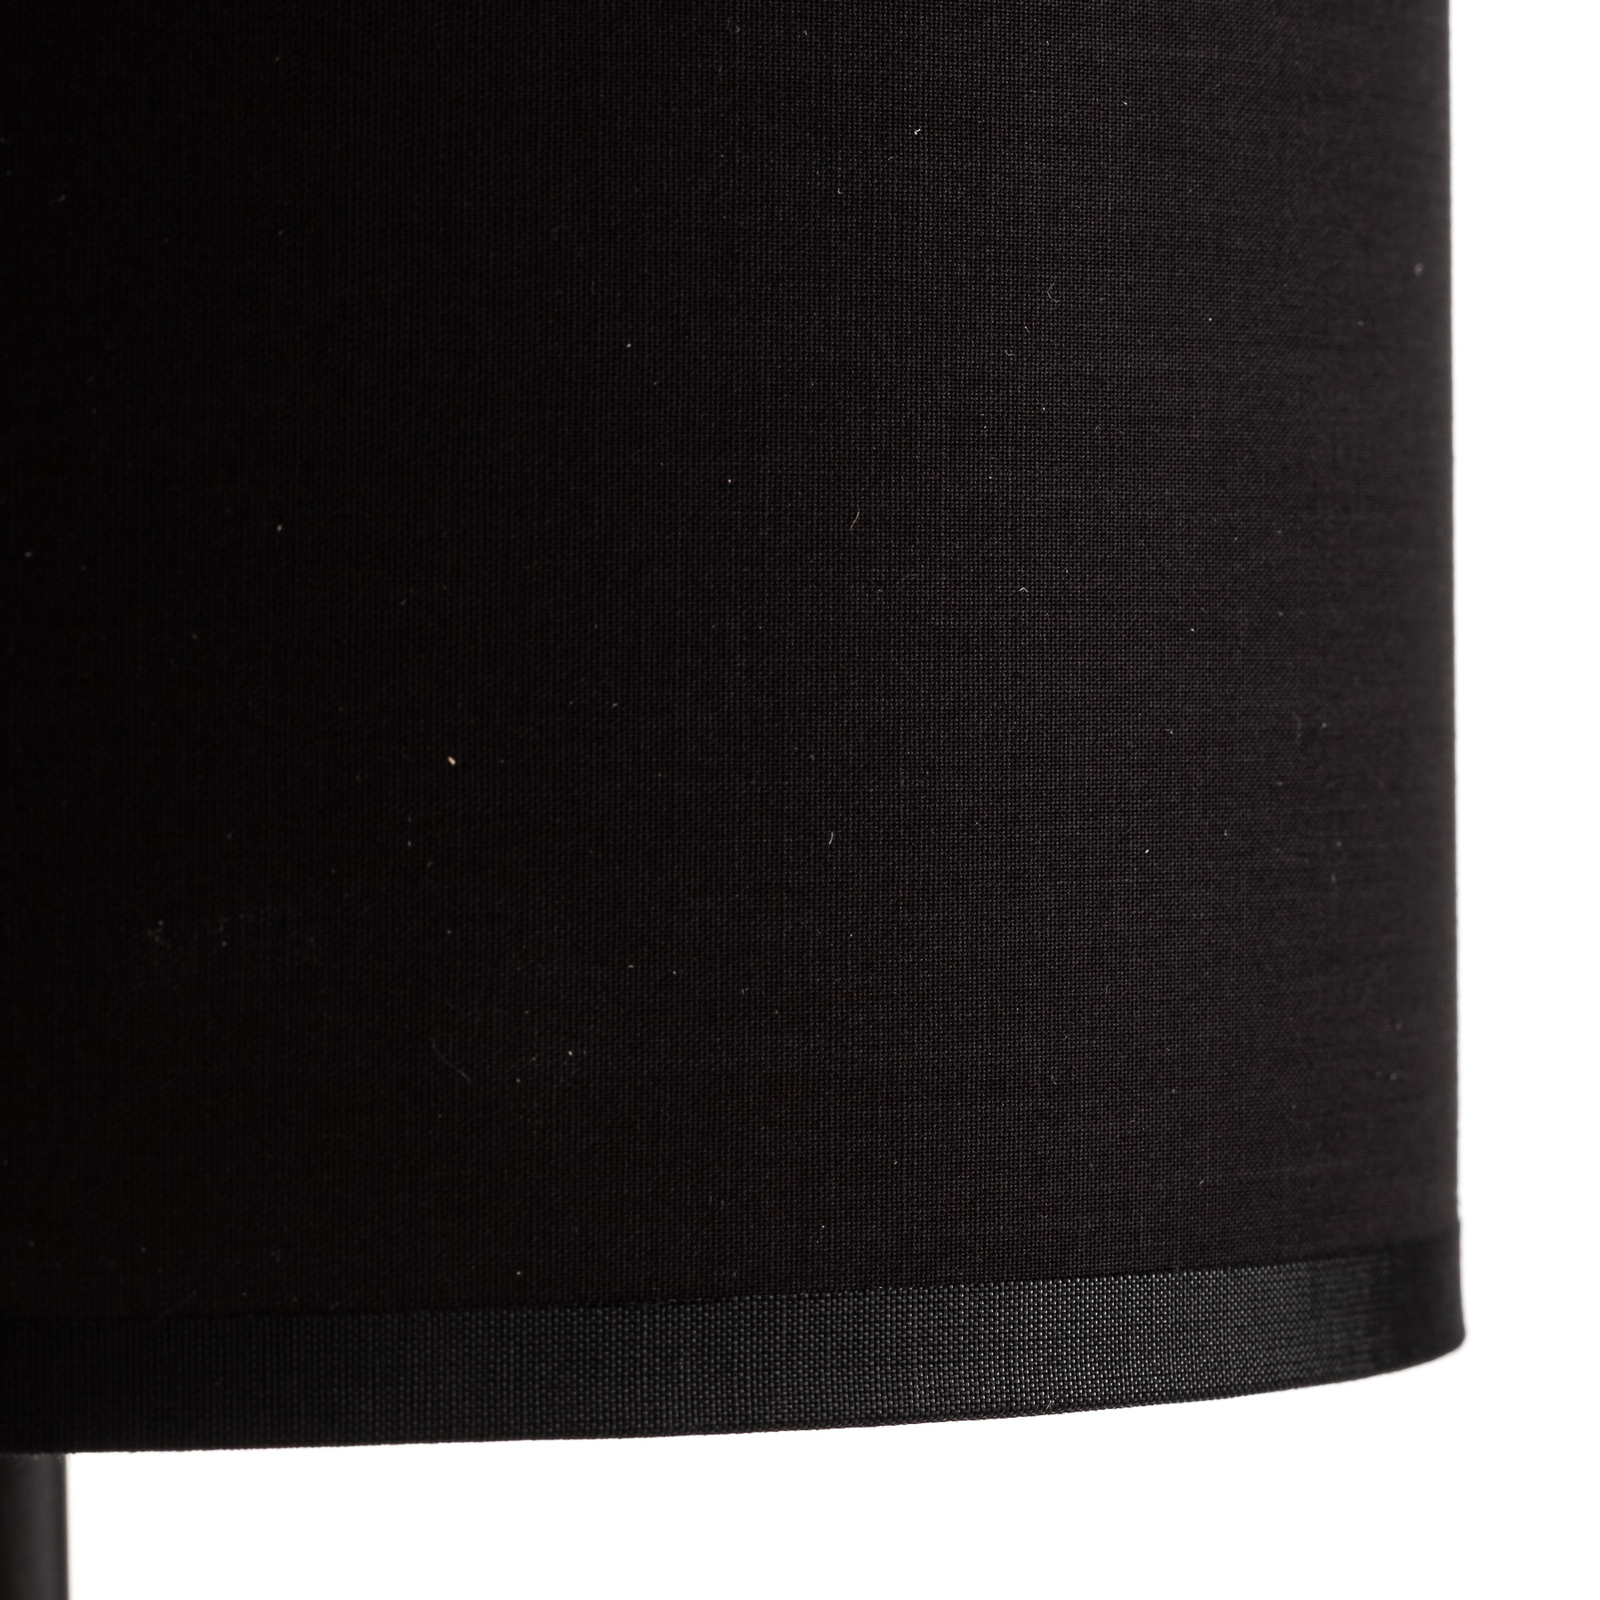 Table lamp Soho cylindrical height 34cm black/gold